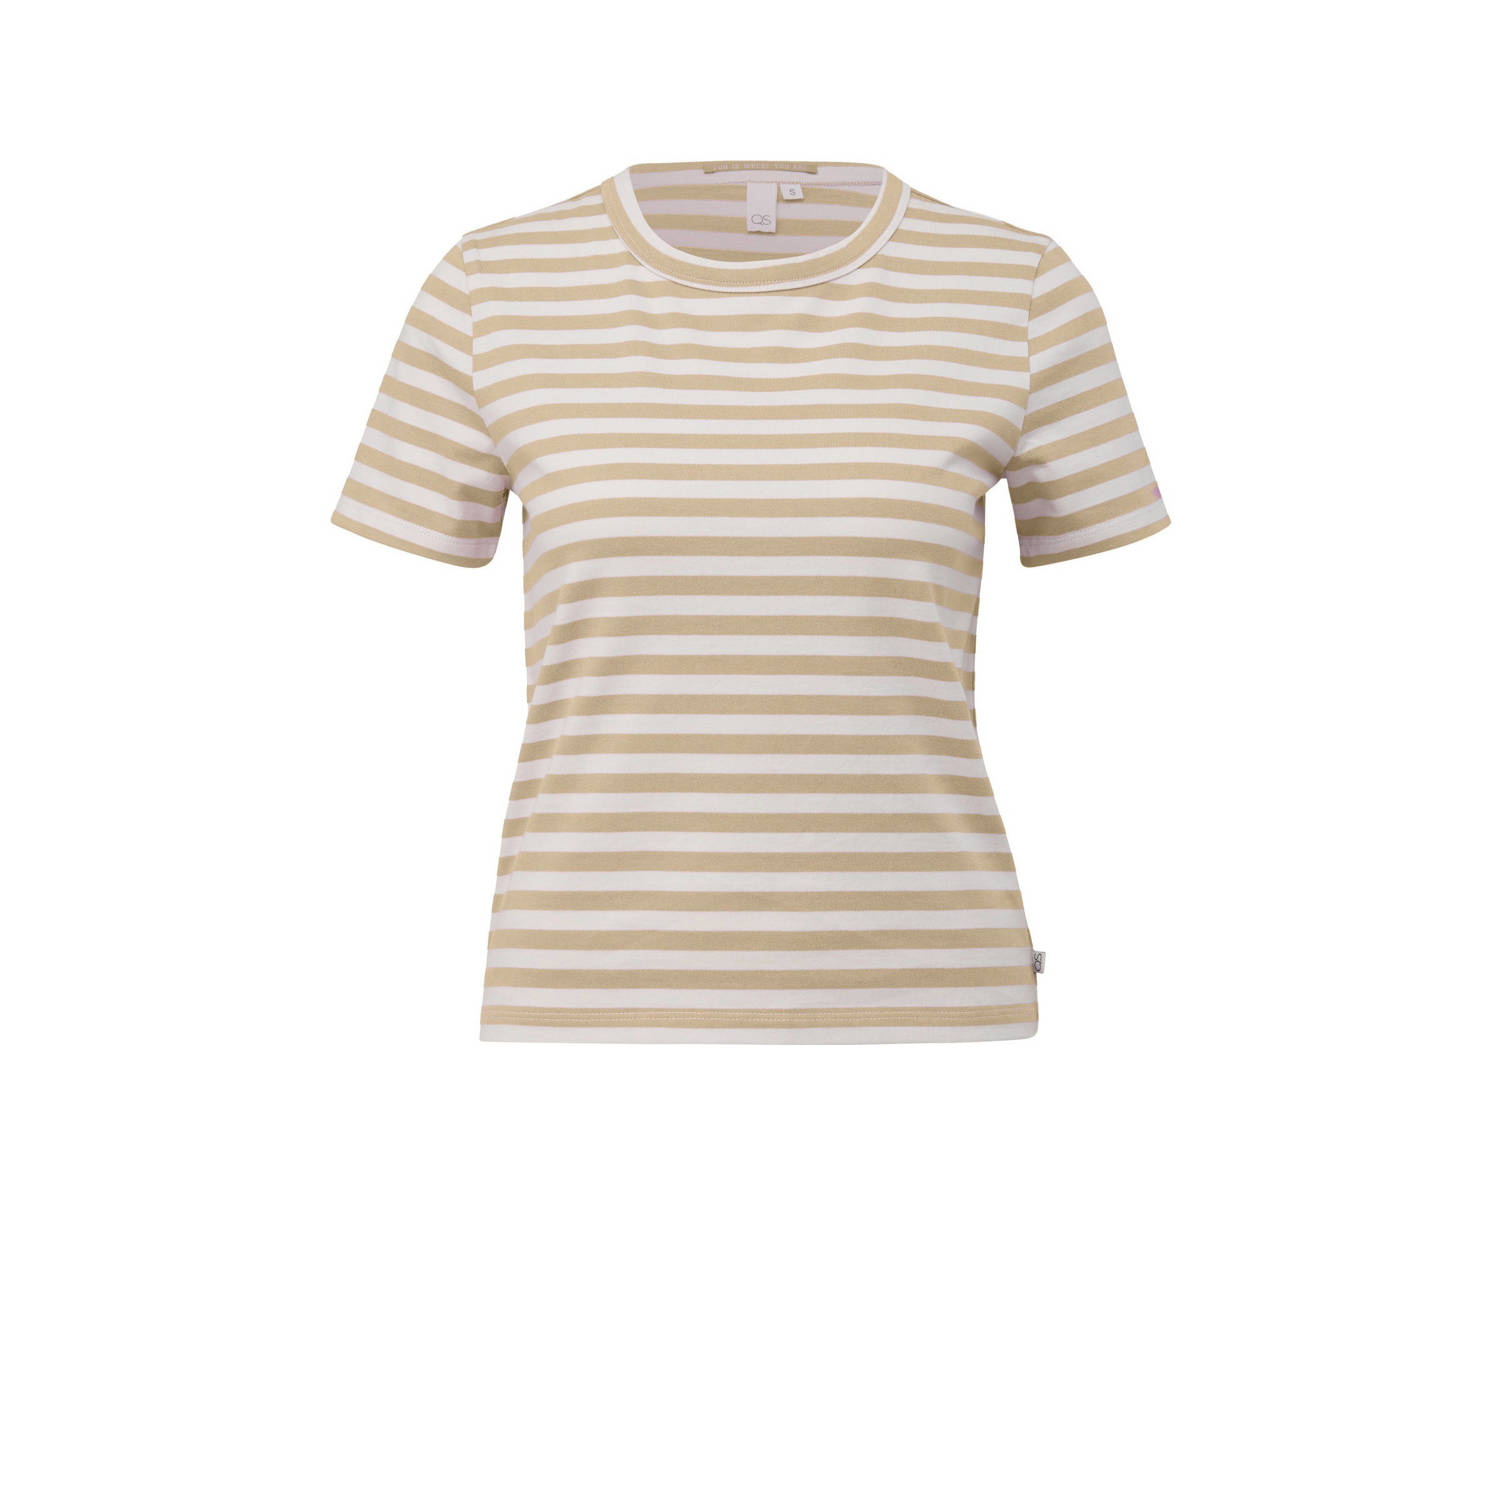 Q S by s.Oliver gestreept T-shirt beige wit